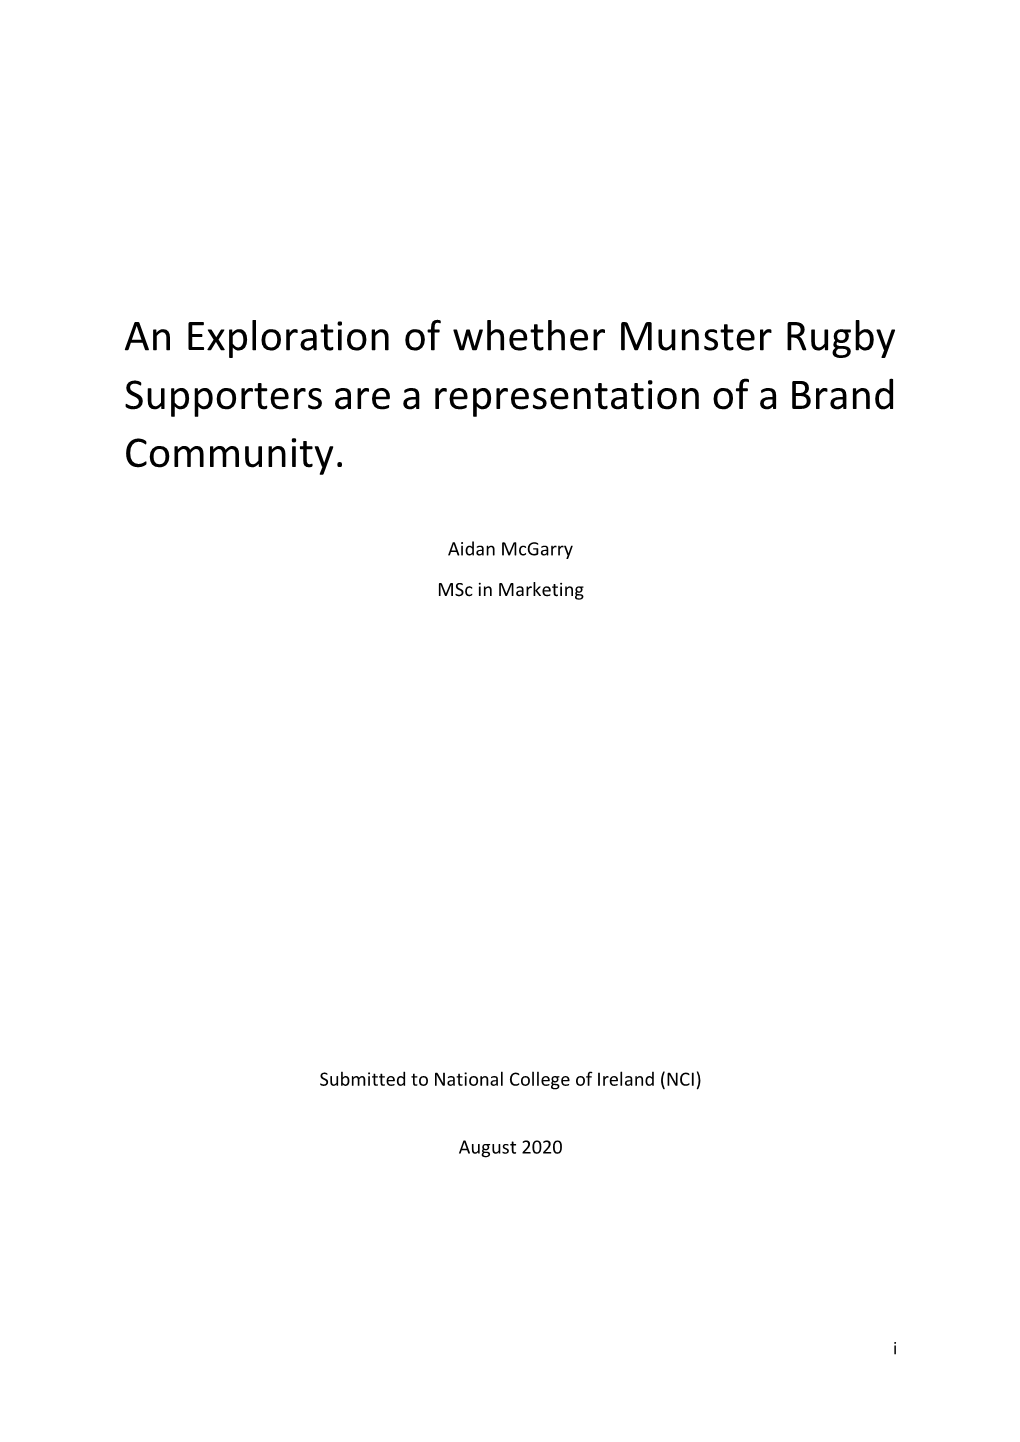 An Exploration of Whether Munster Rugby Supporters Are a Representation of a Brand Community